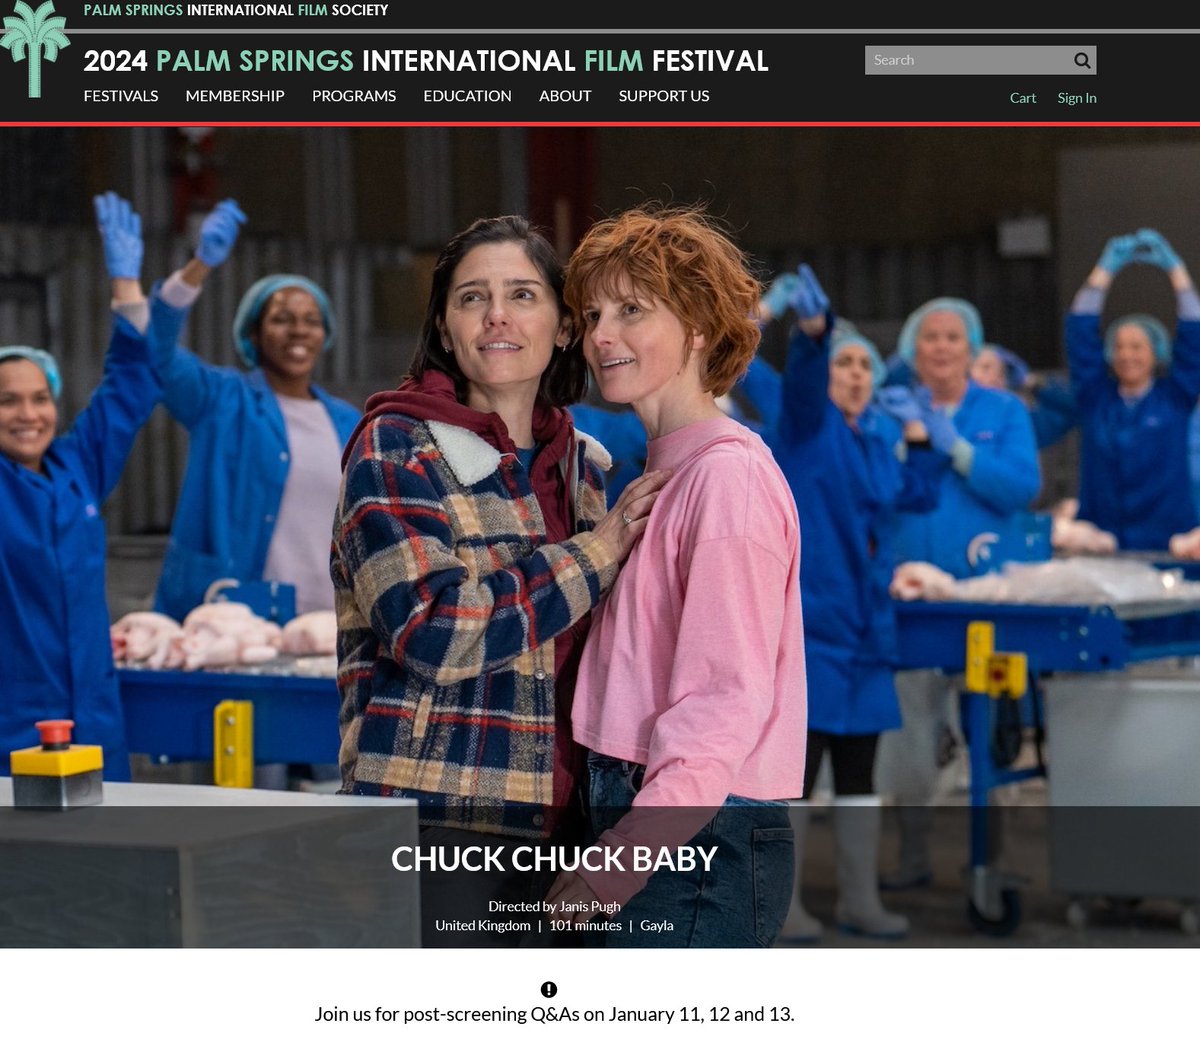 Going to @PSFilmFest this week? Delighted that #ChuckChuckBaby by @janis_pugh will screen Thurs 11th - Sat 13th psfilmfest.org/film-festival-… @BFI_Industry @BBCFilm @FfilmCymruWales